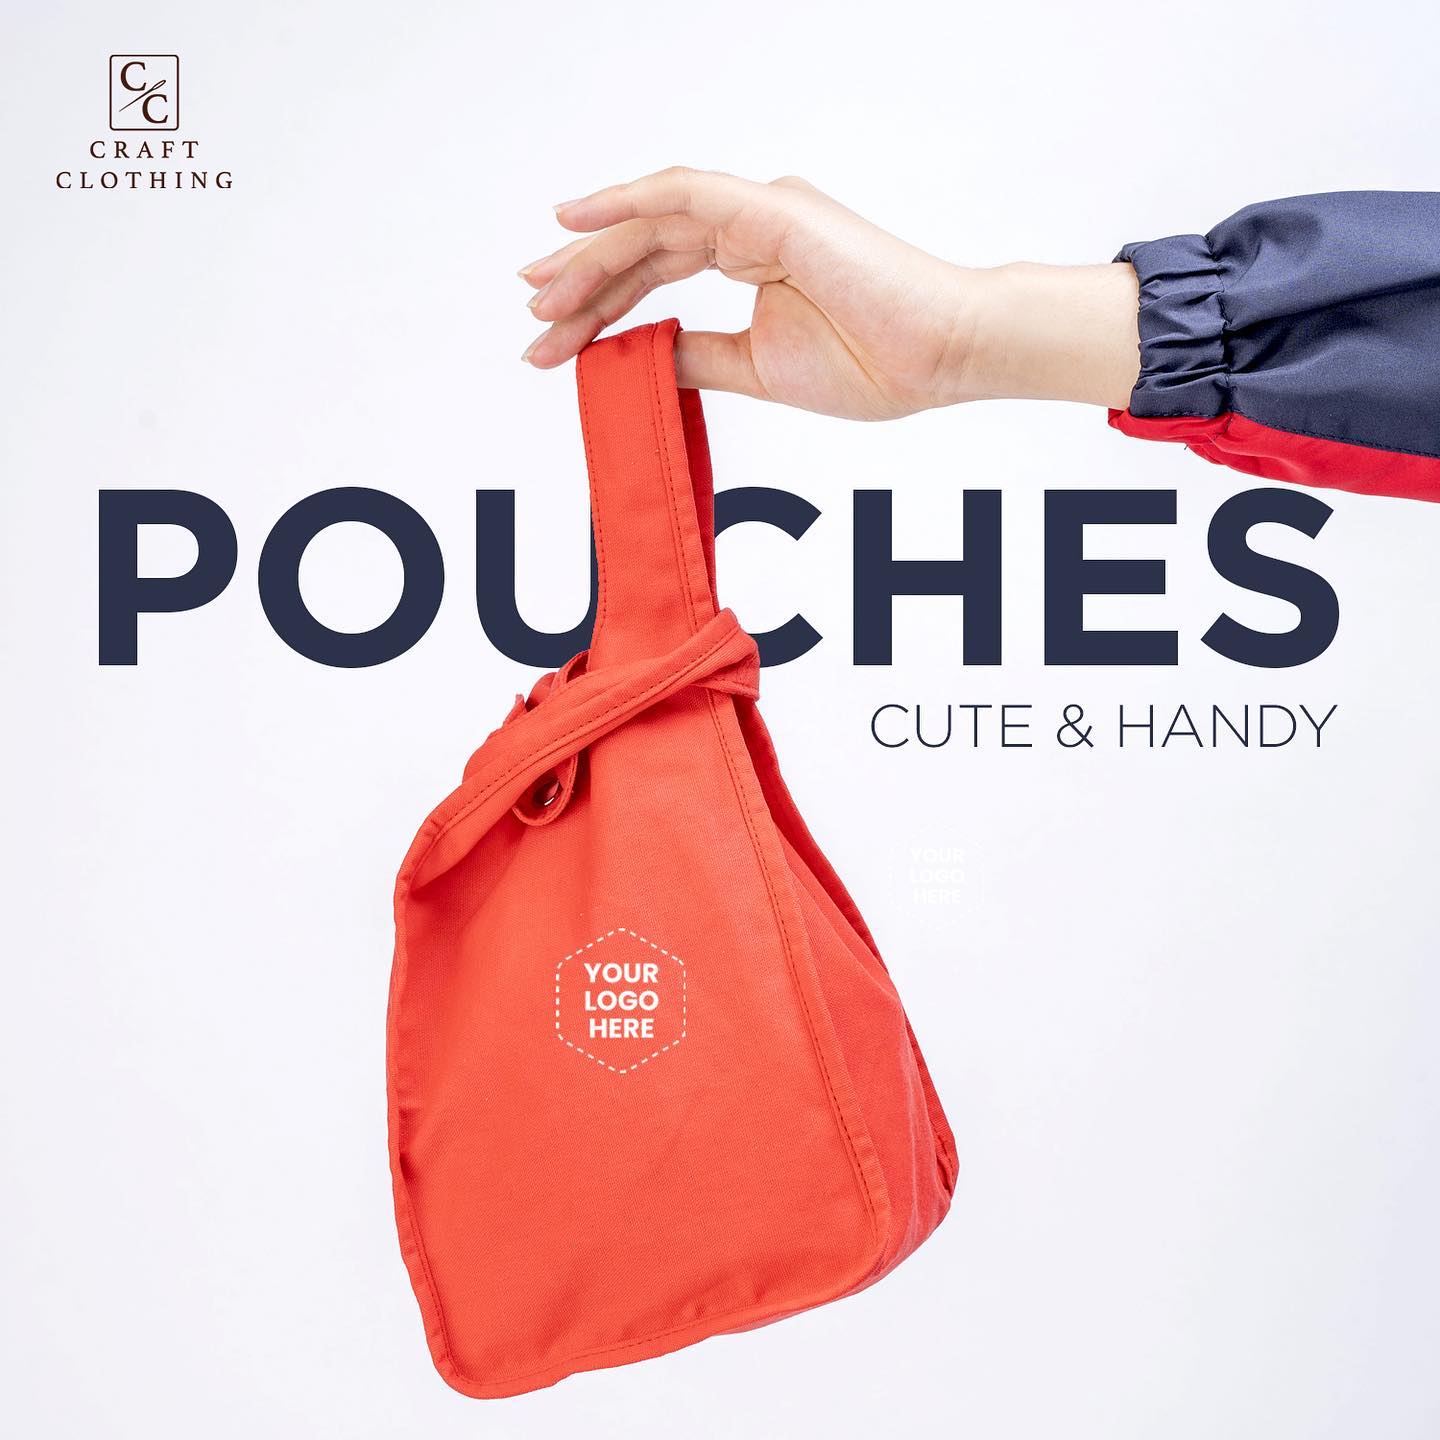 Pouches Cute and Handy